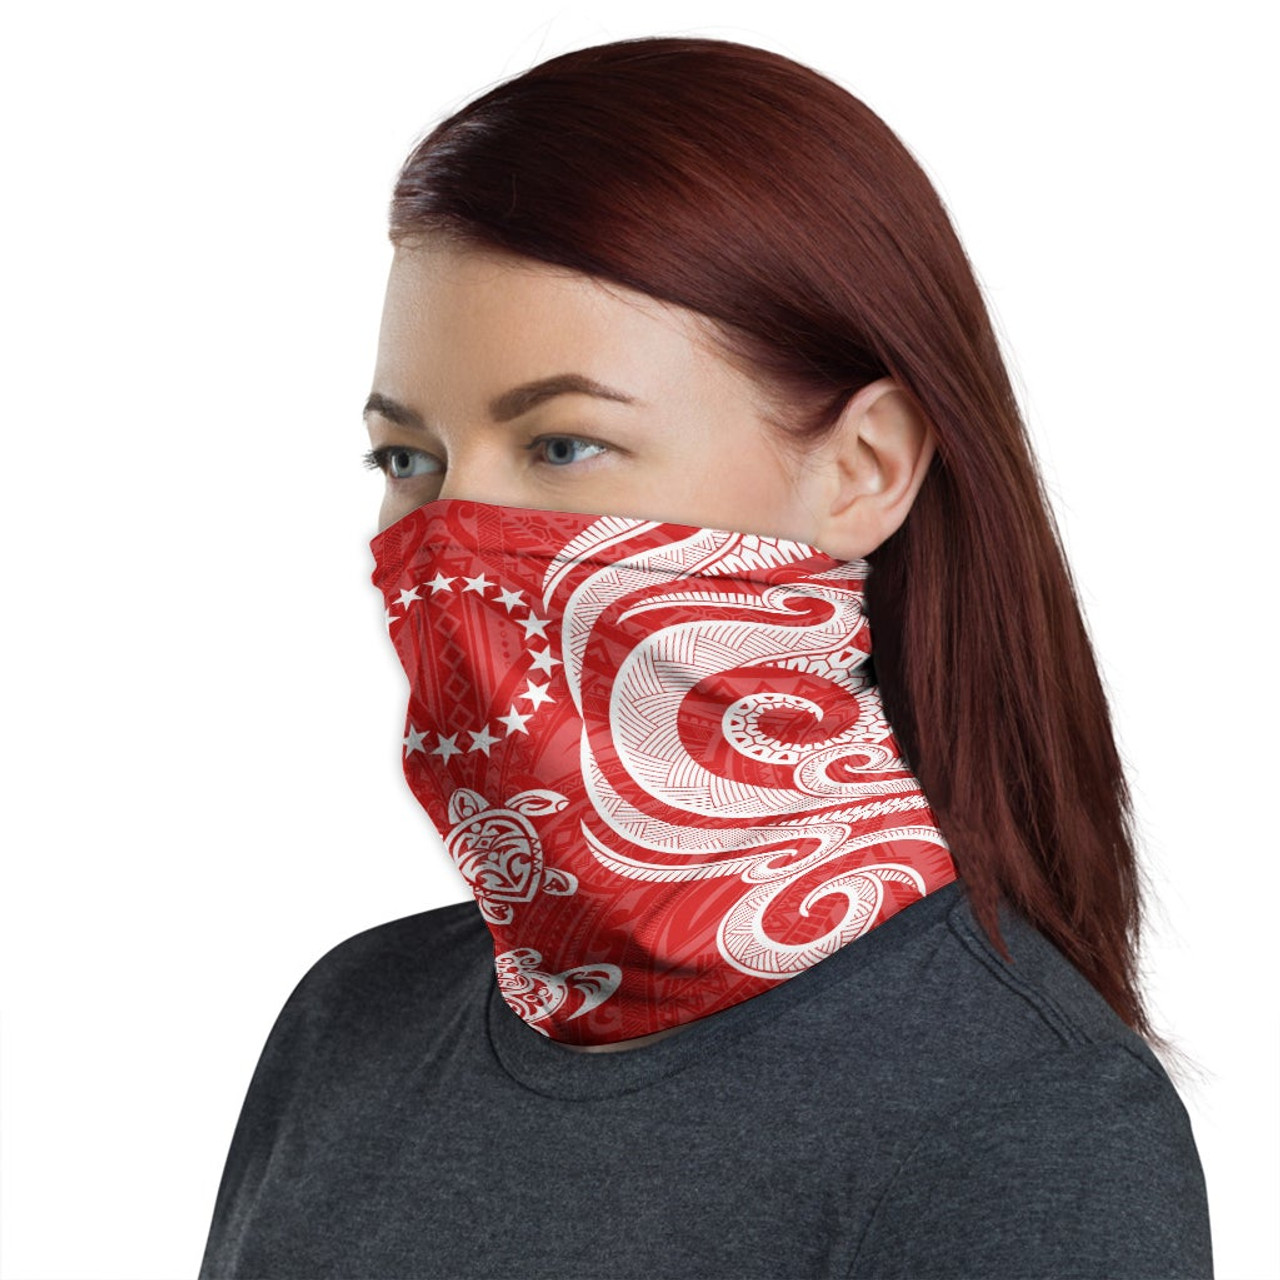 Cook islands Neck Gaiter - Turtle Tentacle White Red 1